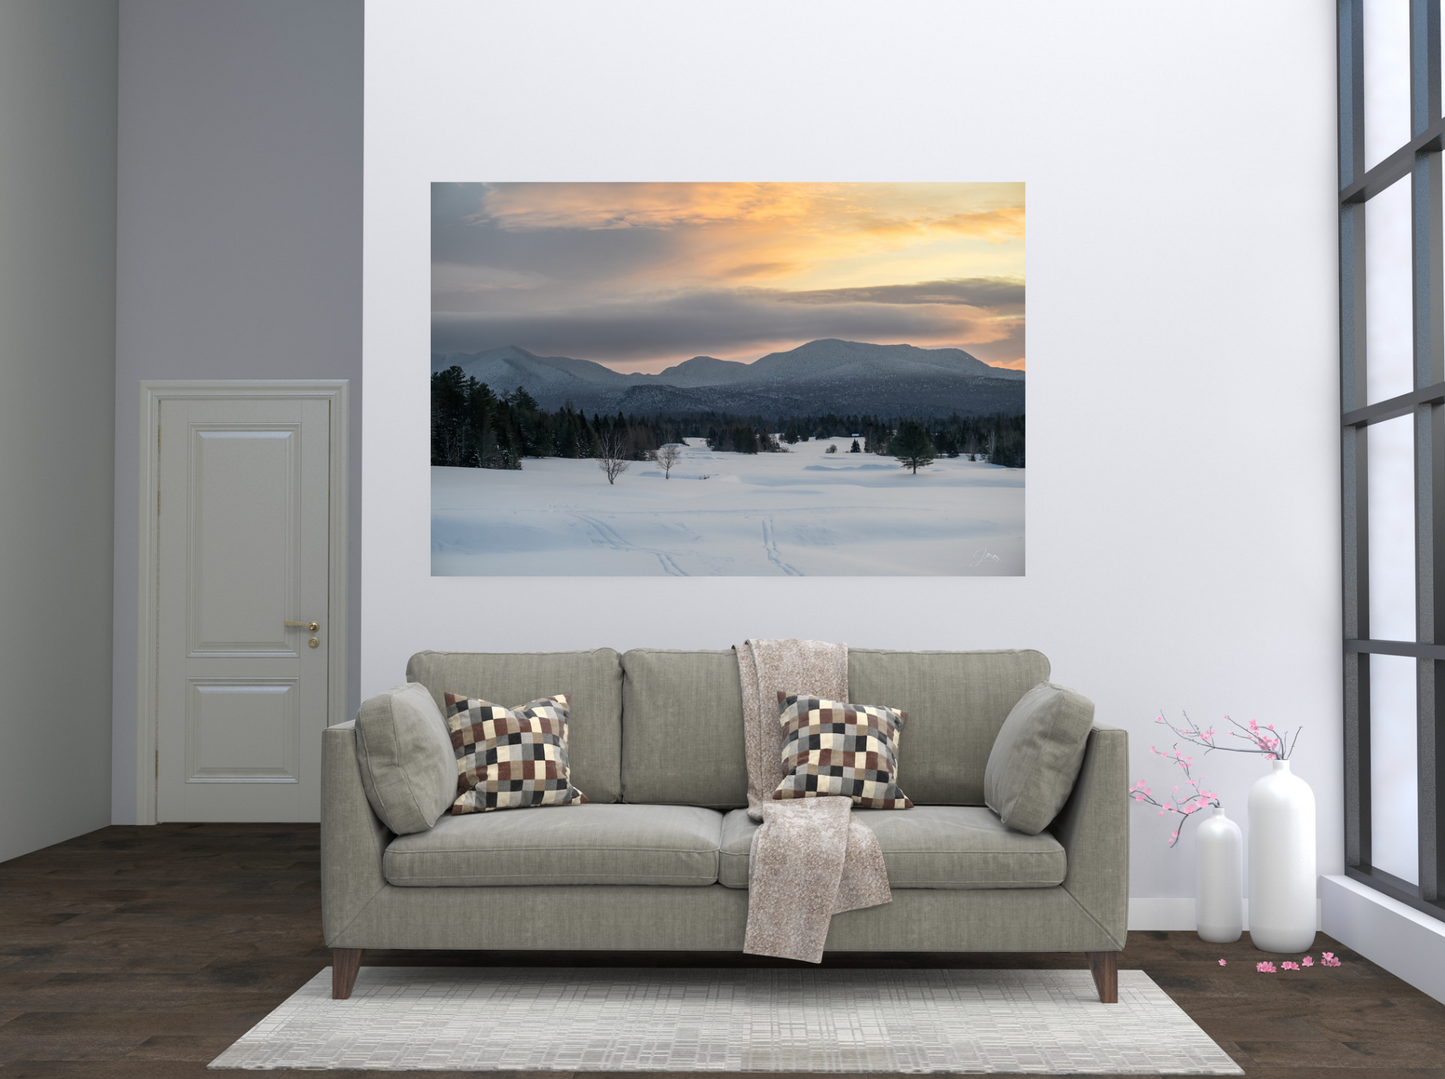 print of a sunrise over the adirondack moutains